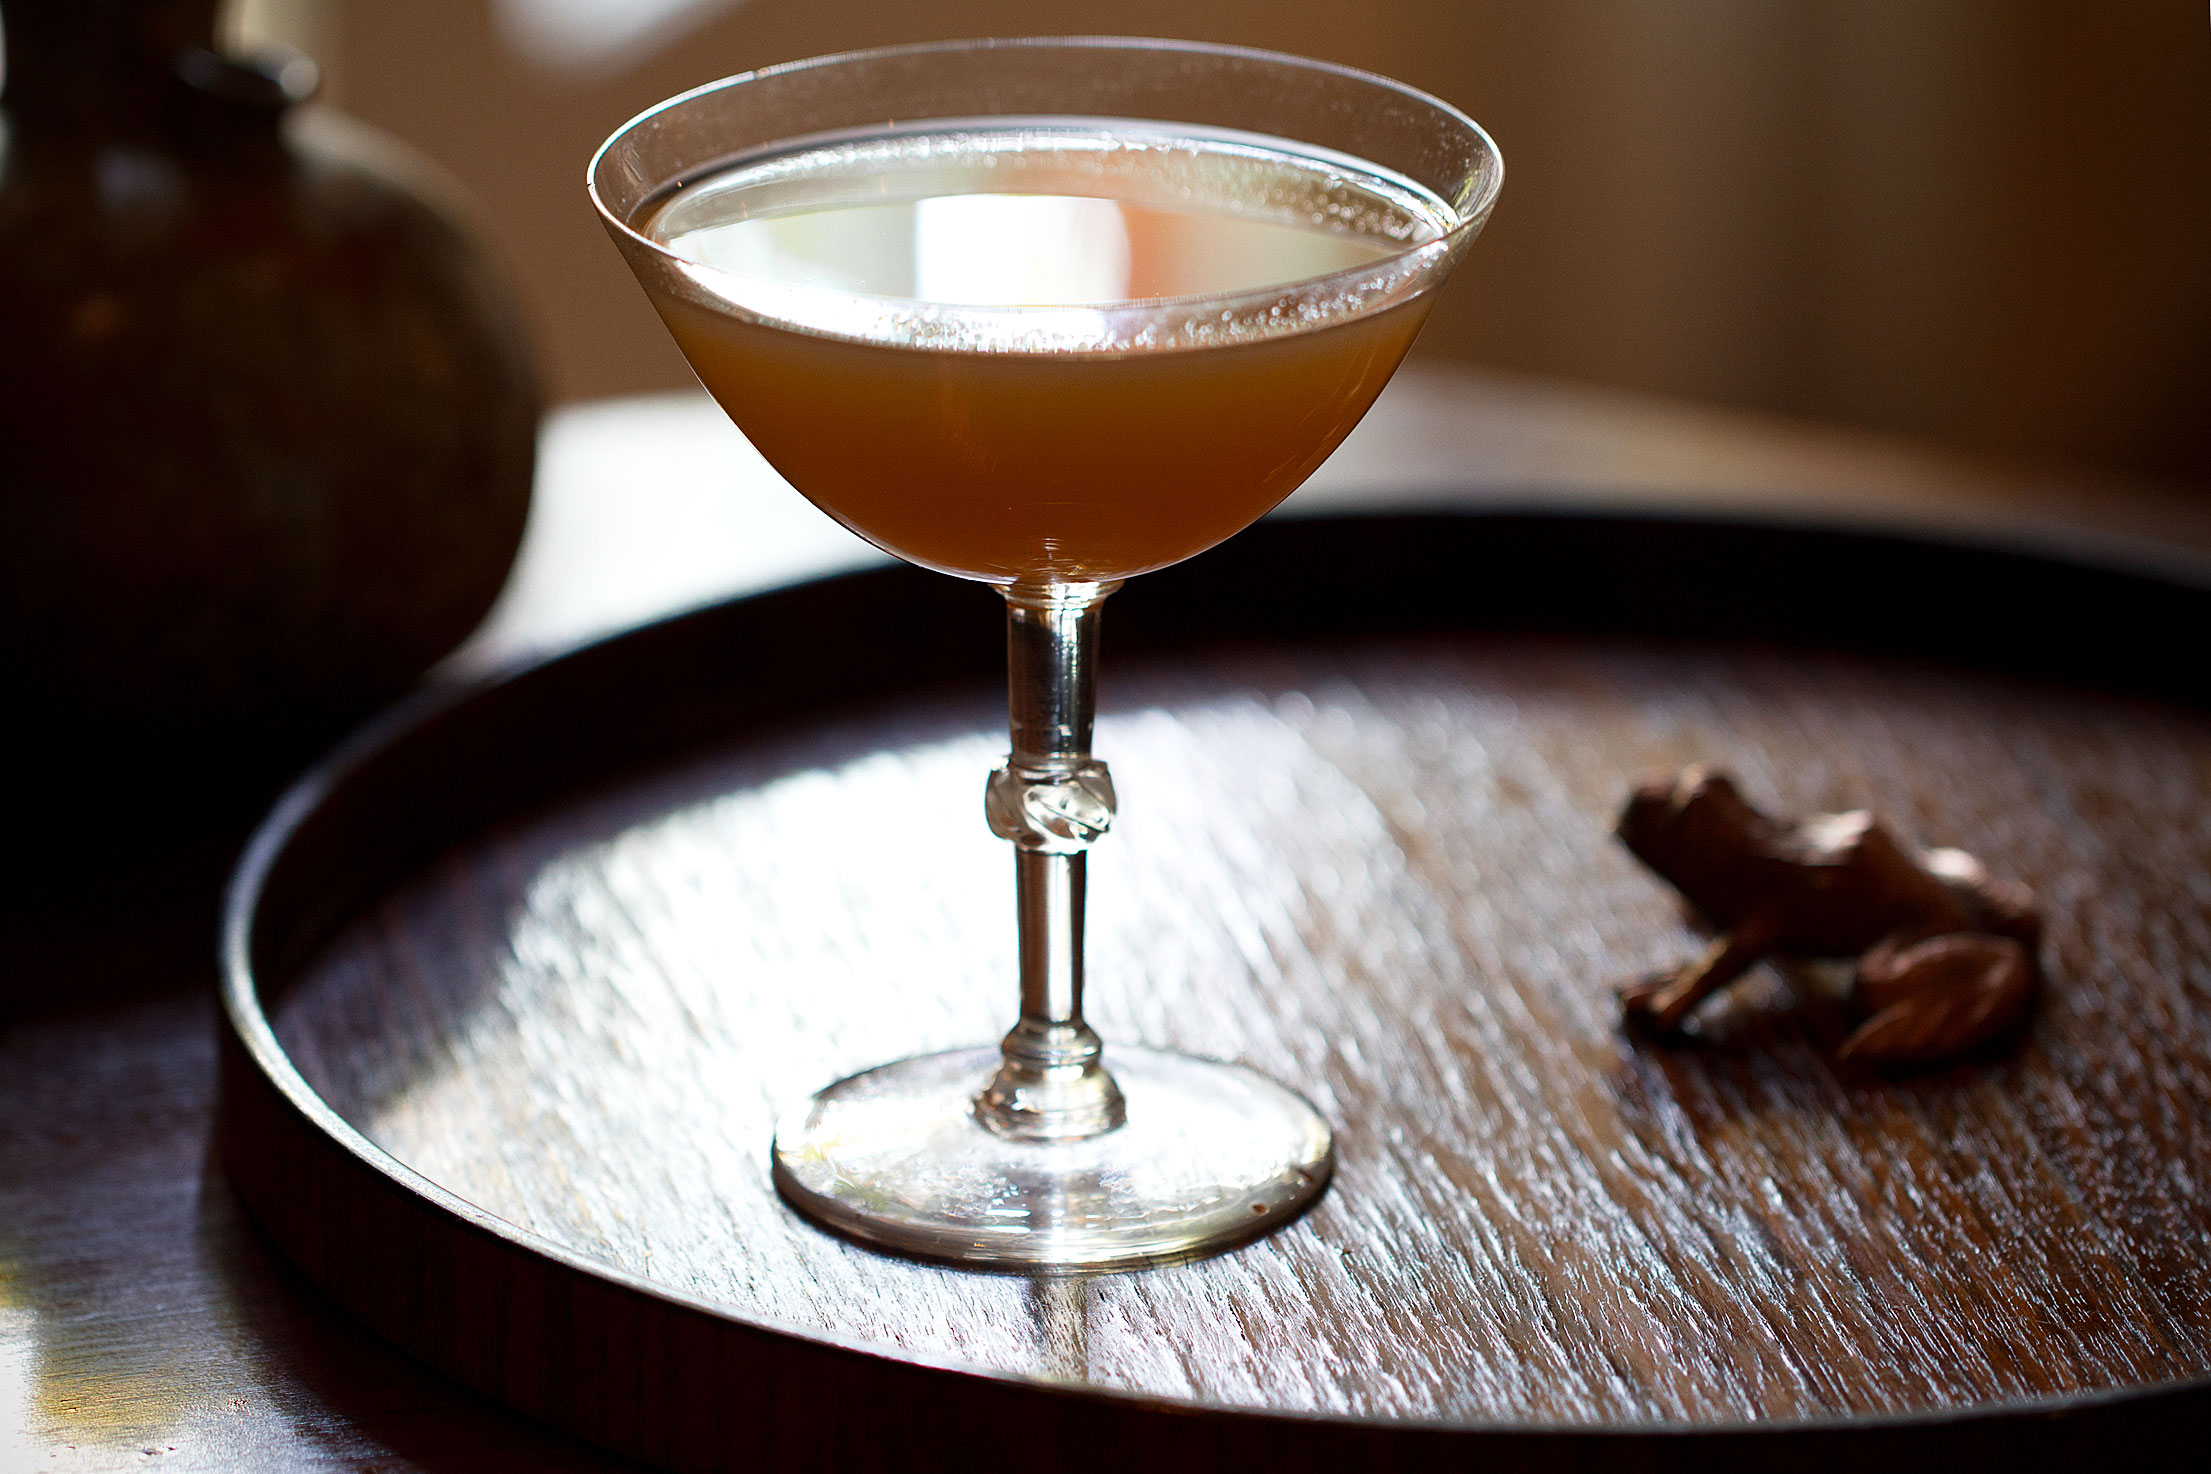 Algonquin Cocktail: Rye, Vermouth, and Pineapple Juice